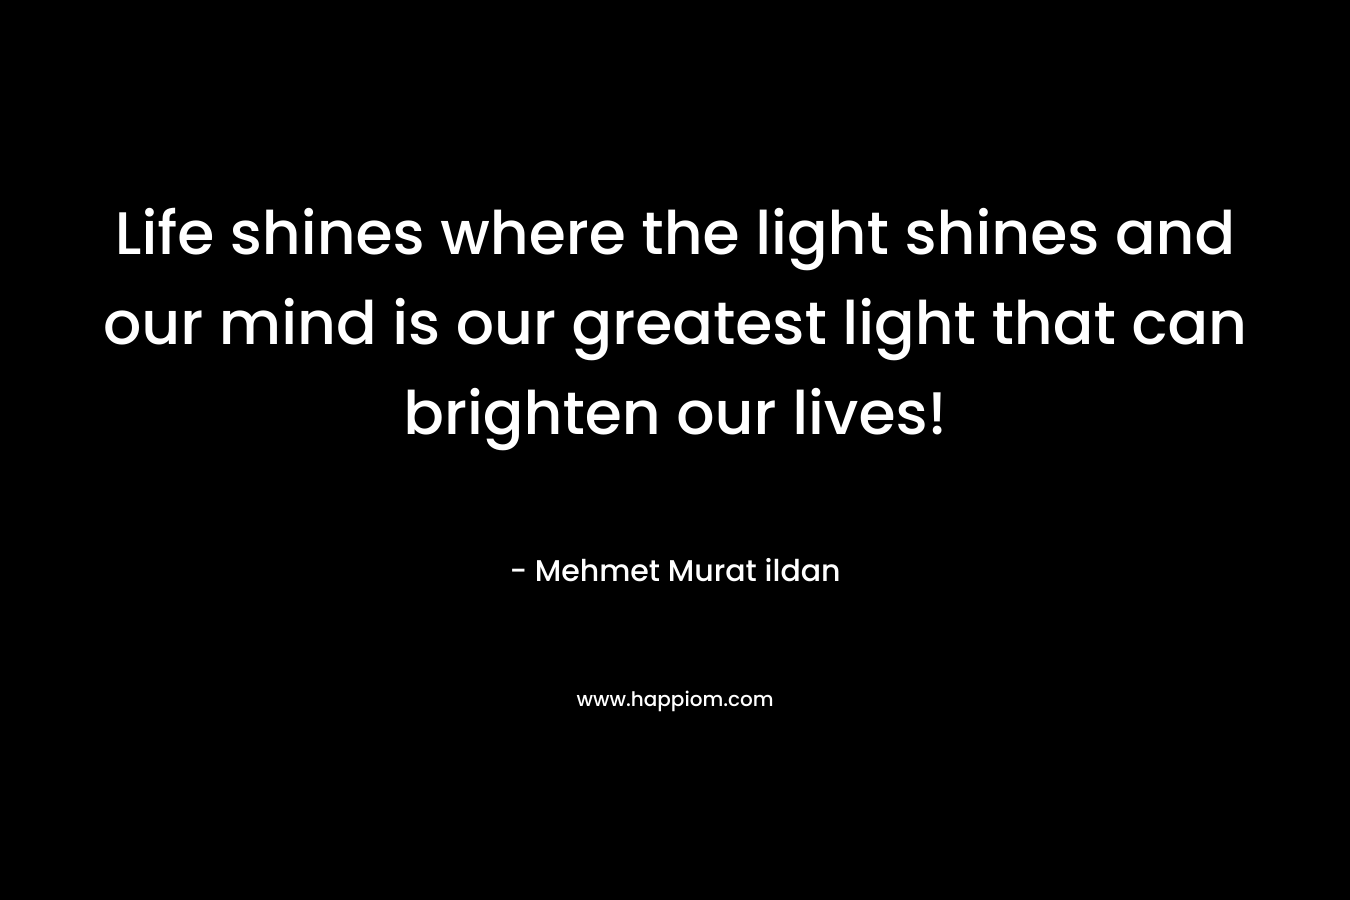 Life shines where the light shines and our mind is our greatest light that can brighten our lives!